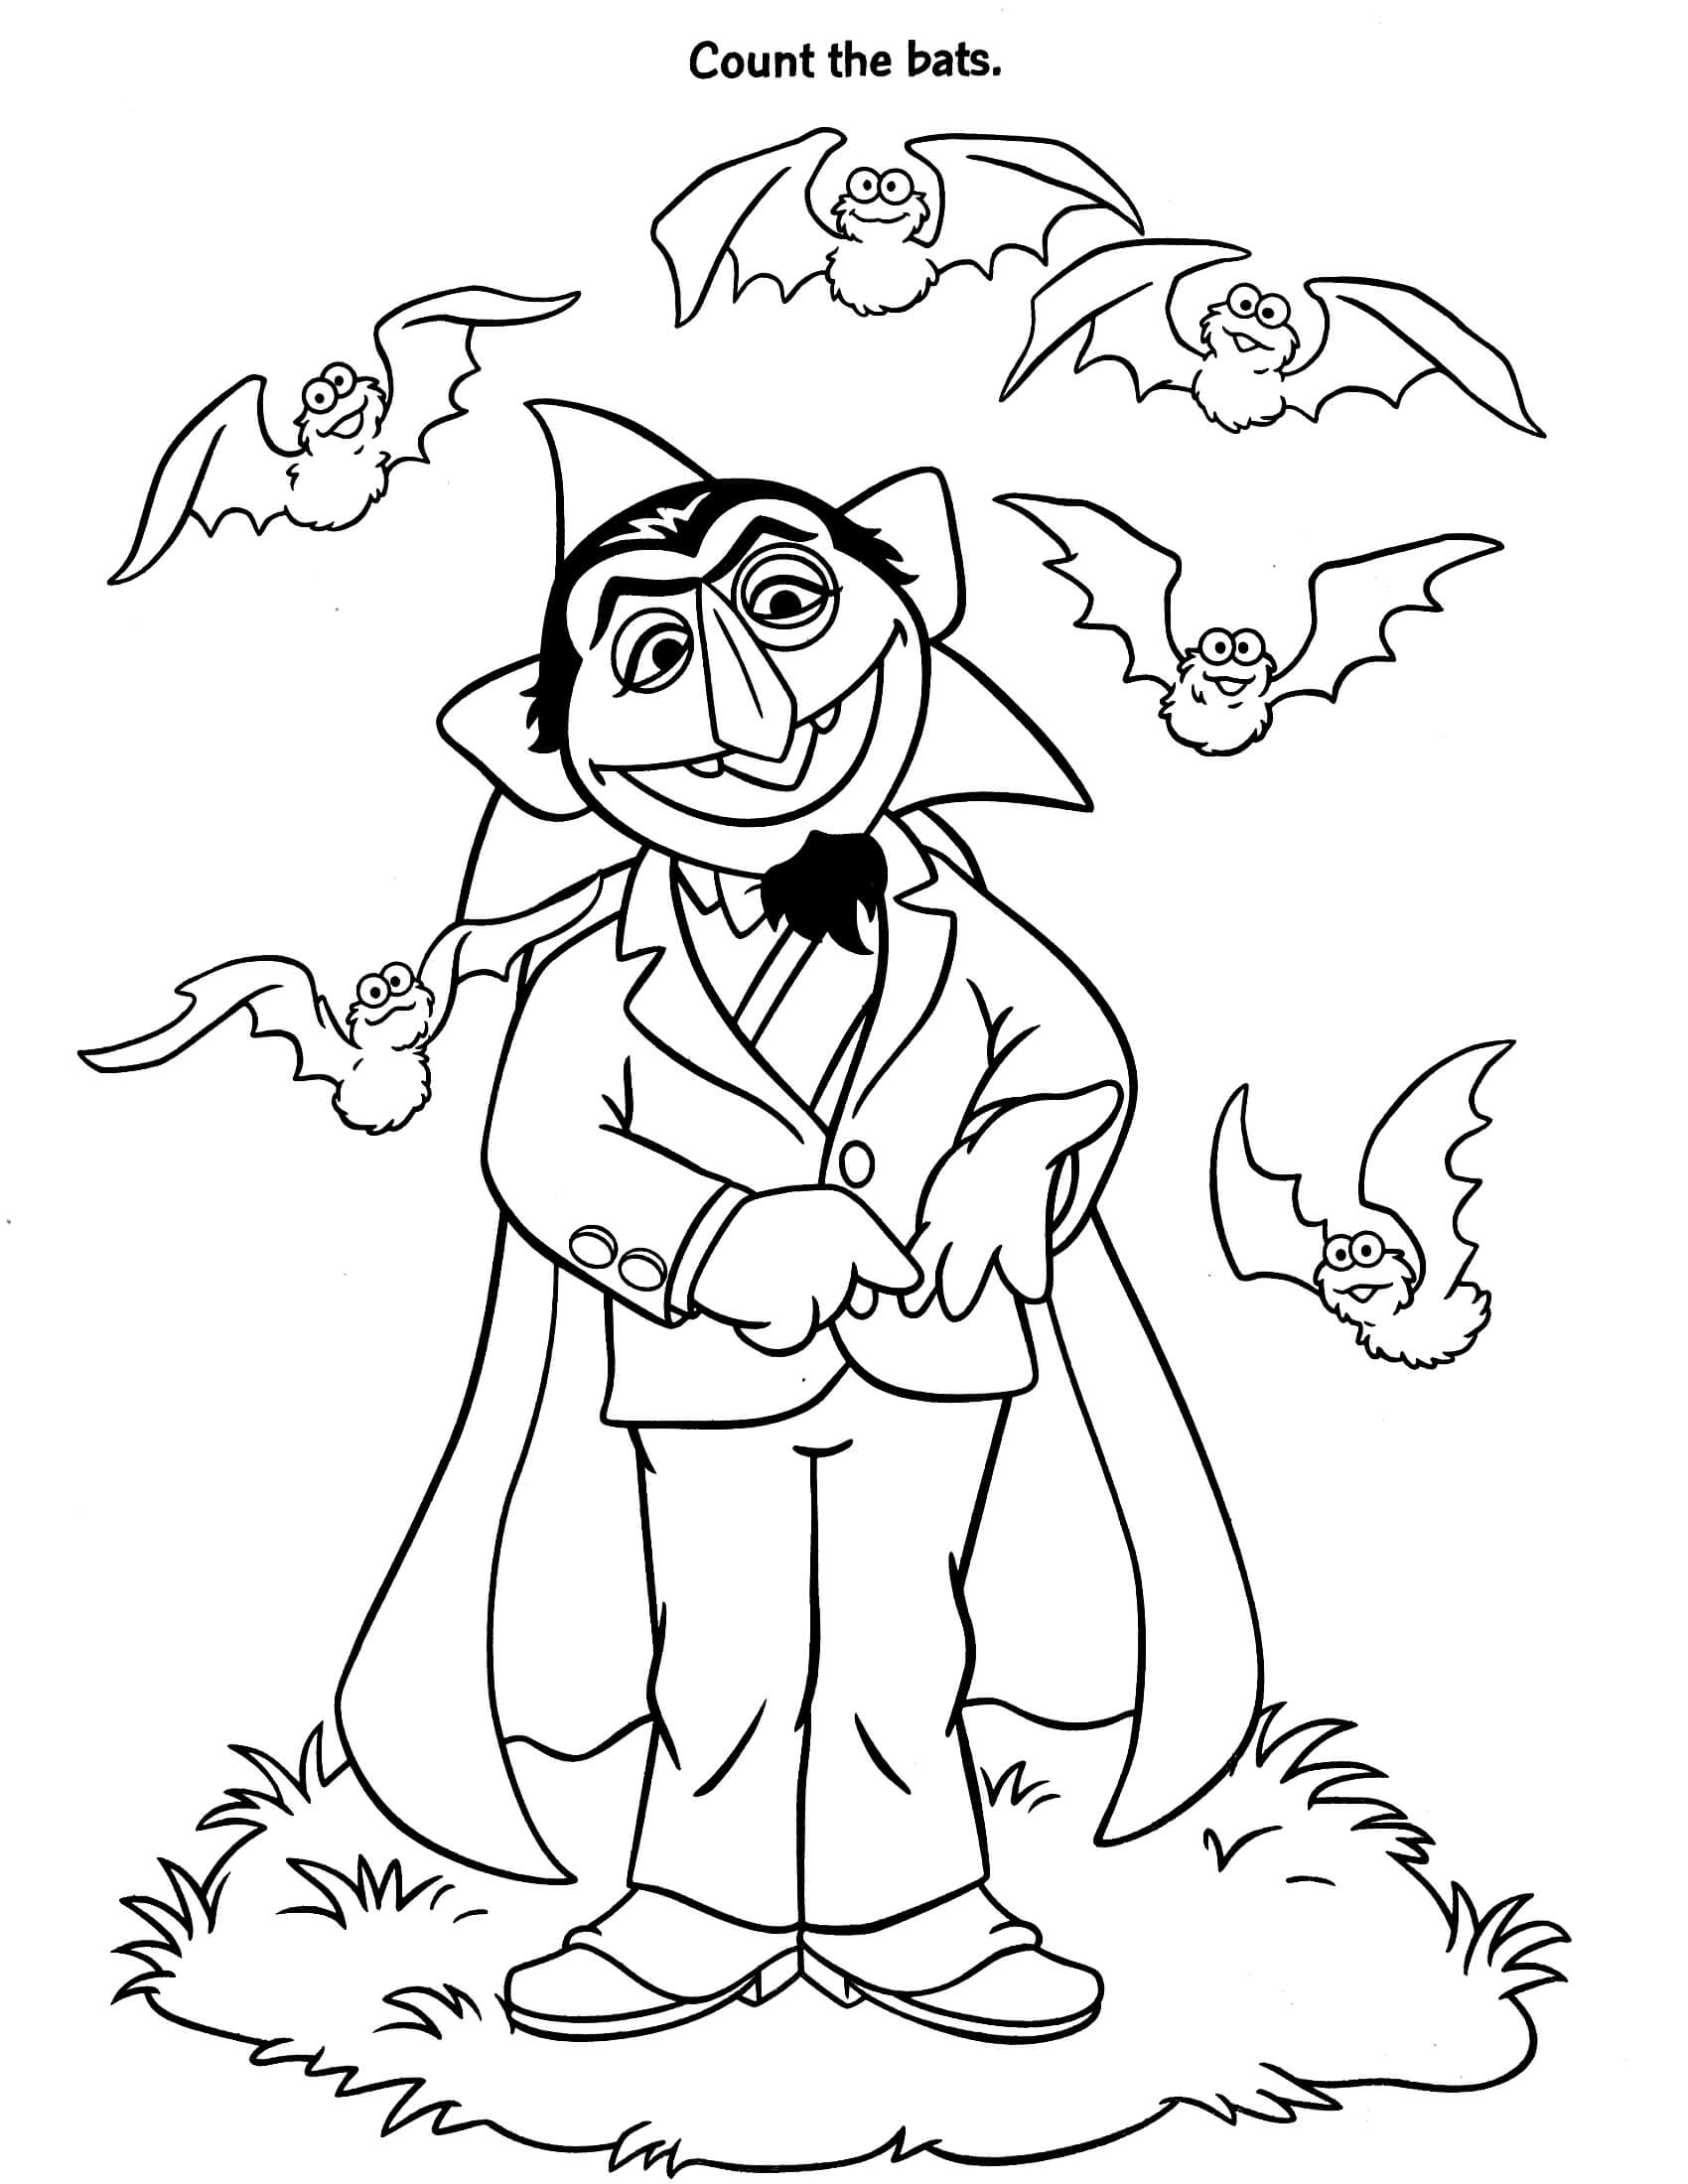 Count Sesame Street Coloring Pages